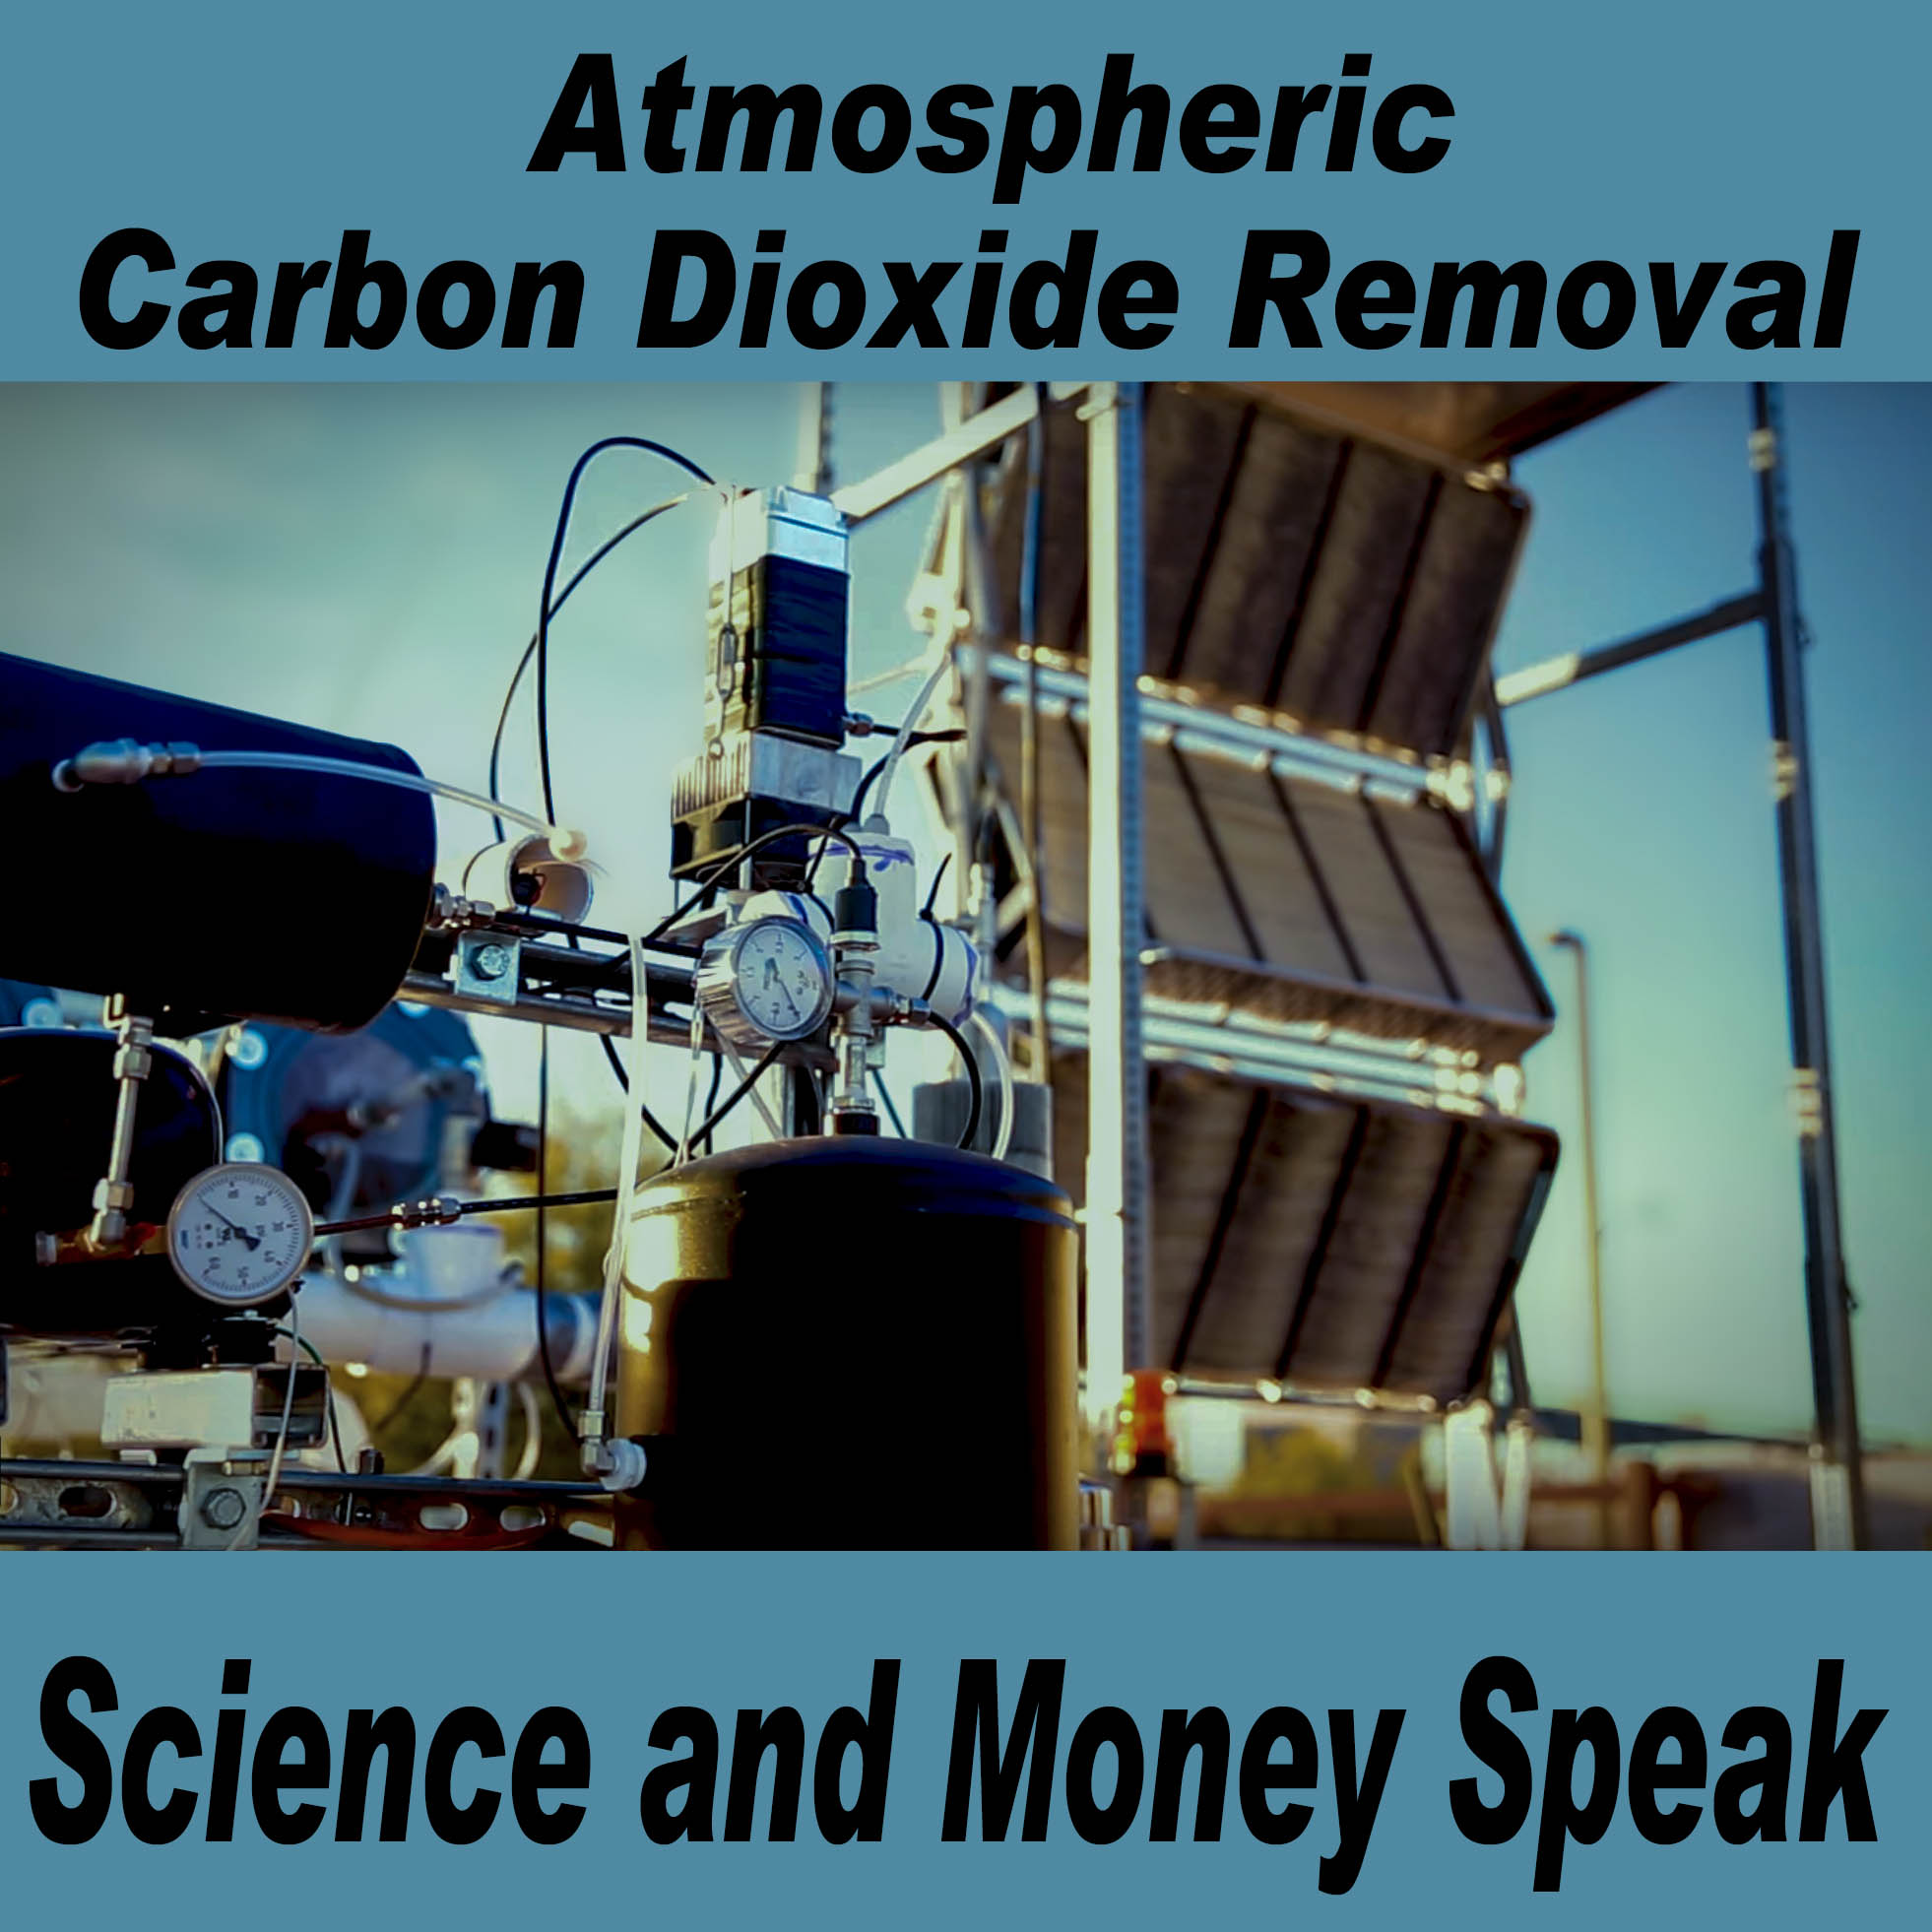 Atmospheric Carbon Dioxide Removal: Science and Money Speak